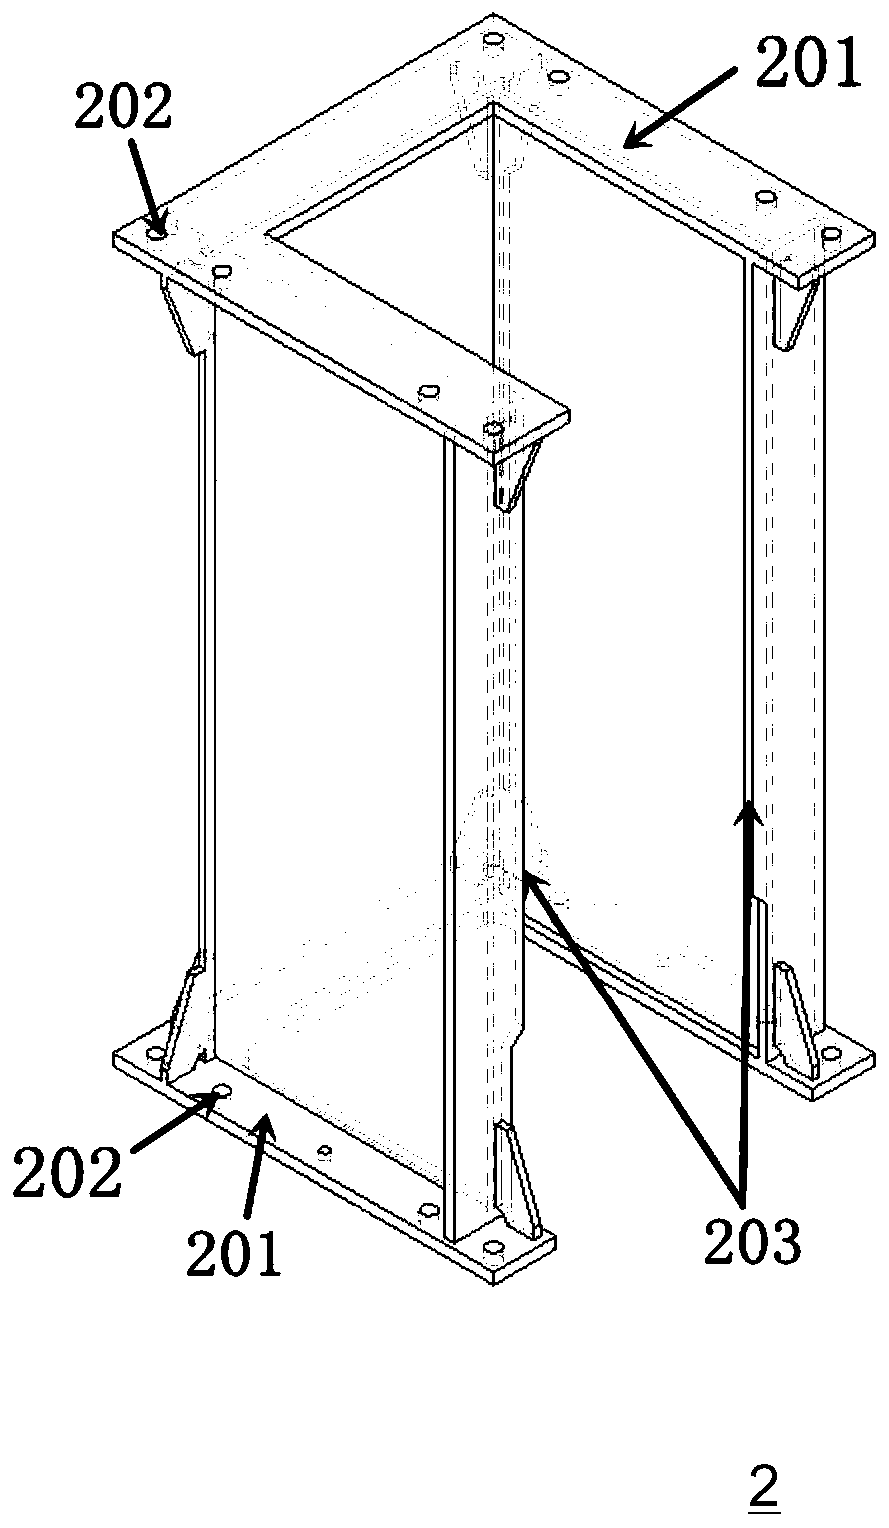 A jacking device for a crane